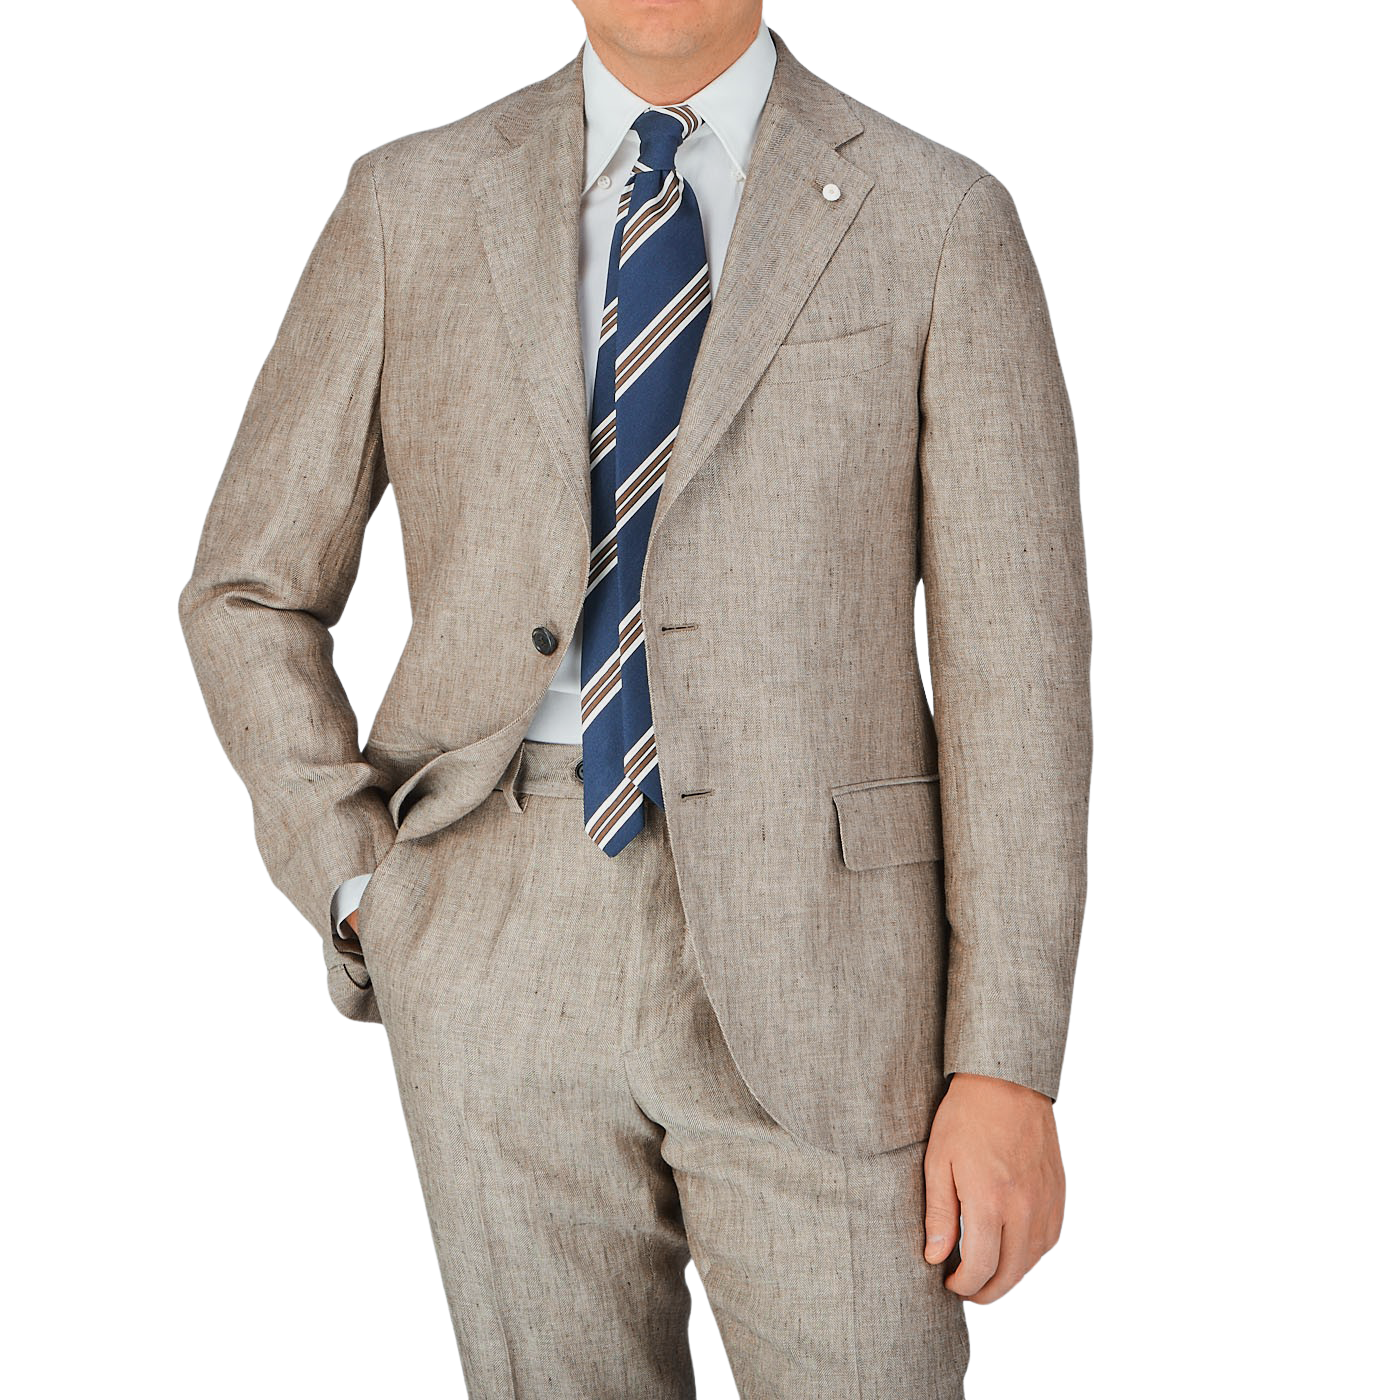 An expert tailor dressed in a Luigi Bianchi Light Brown Herringbone Linen Suit with a blue tie.